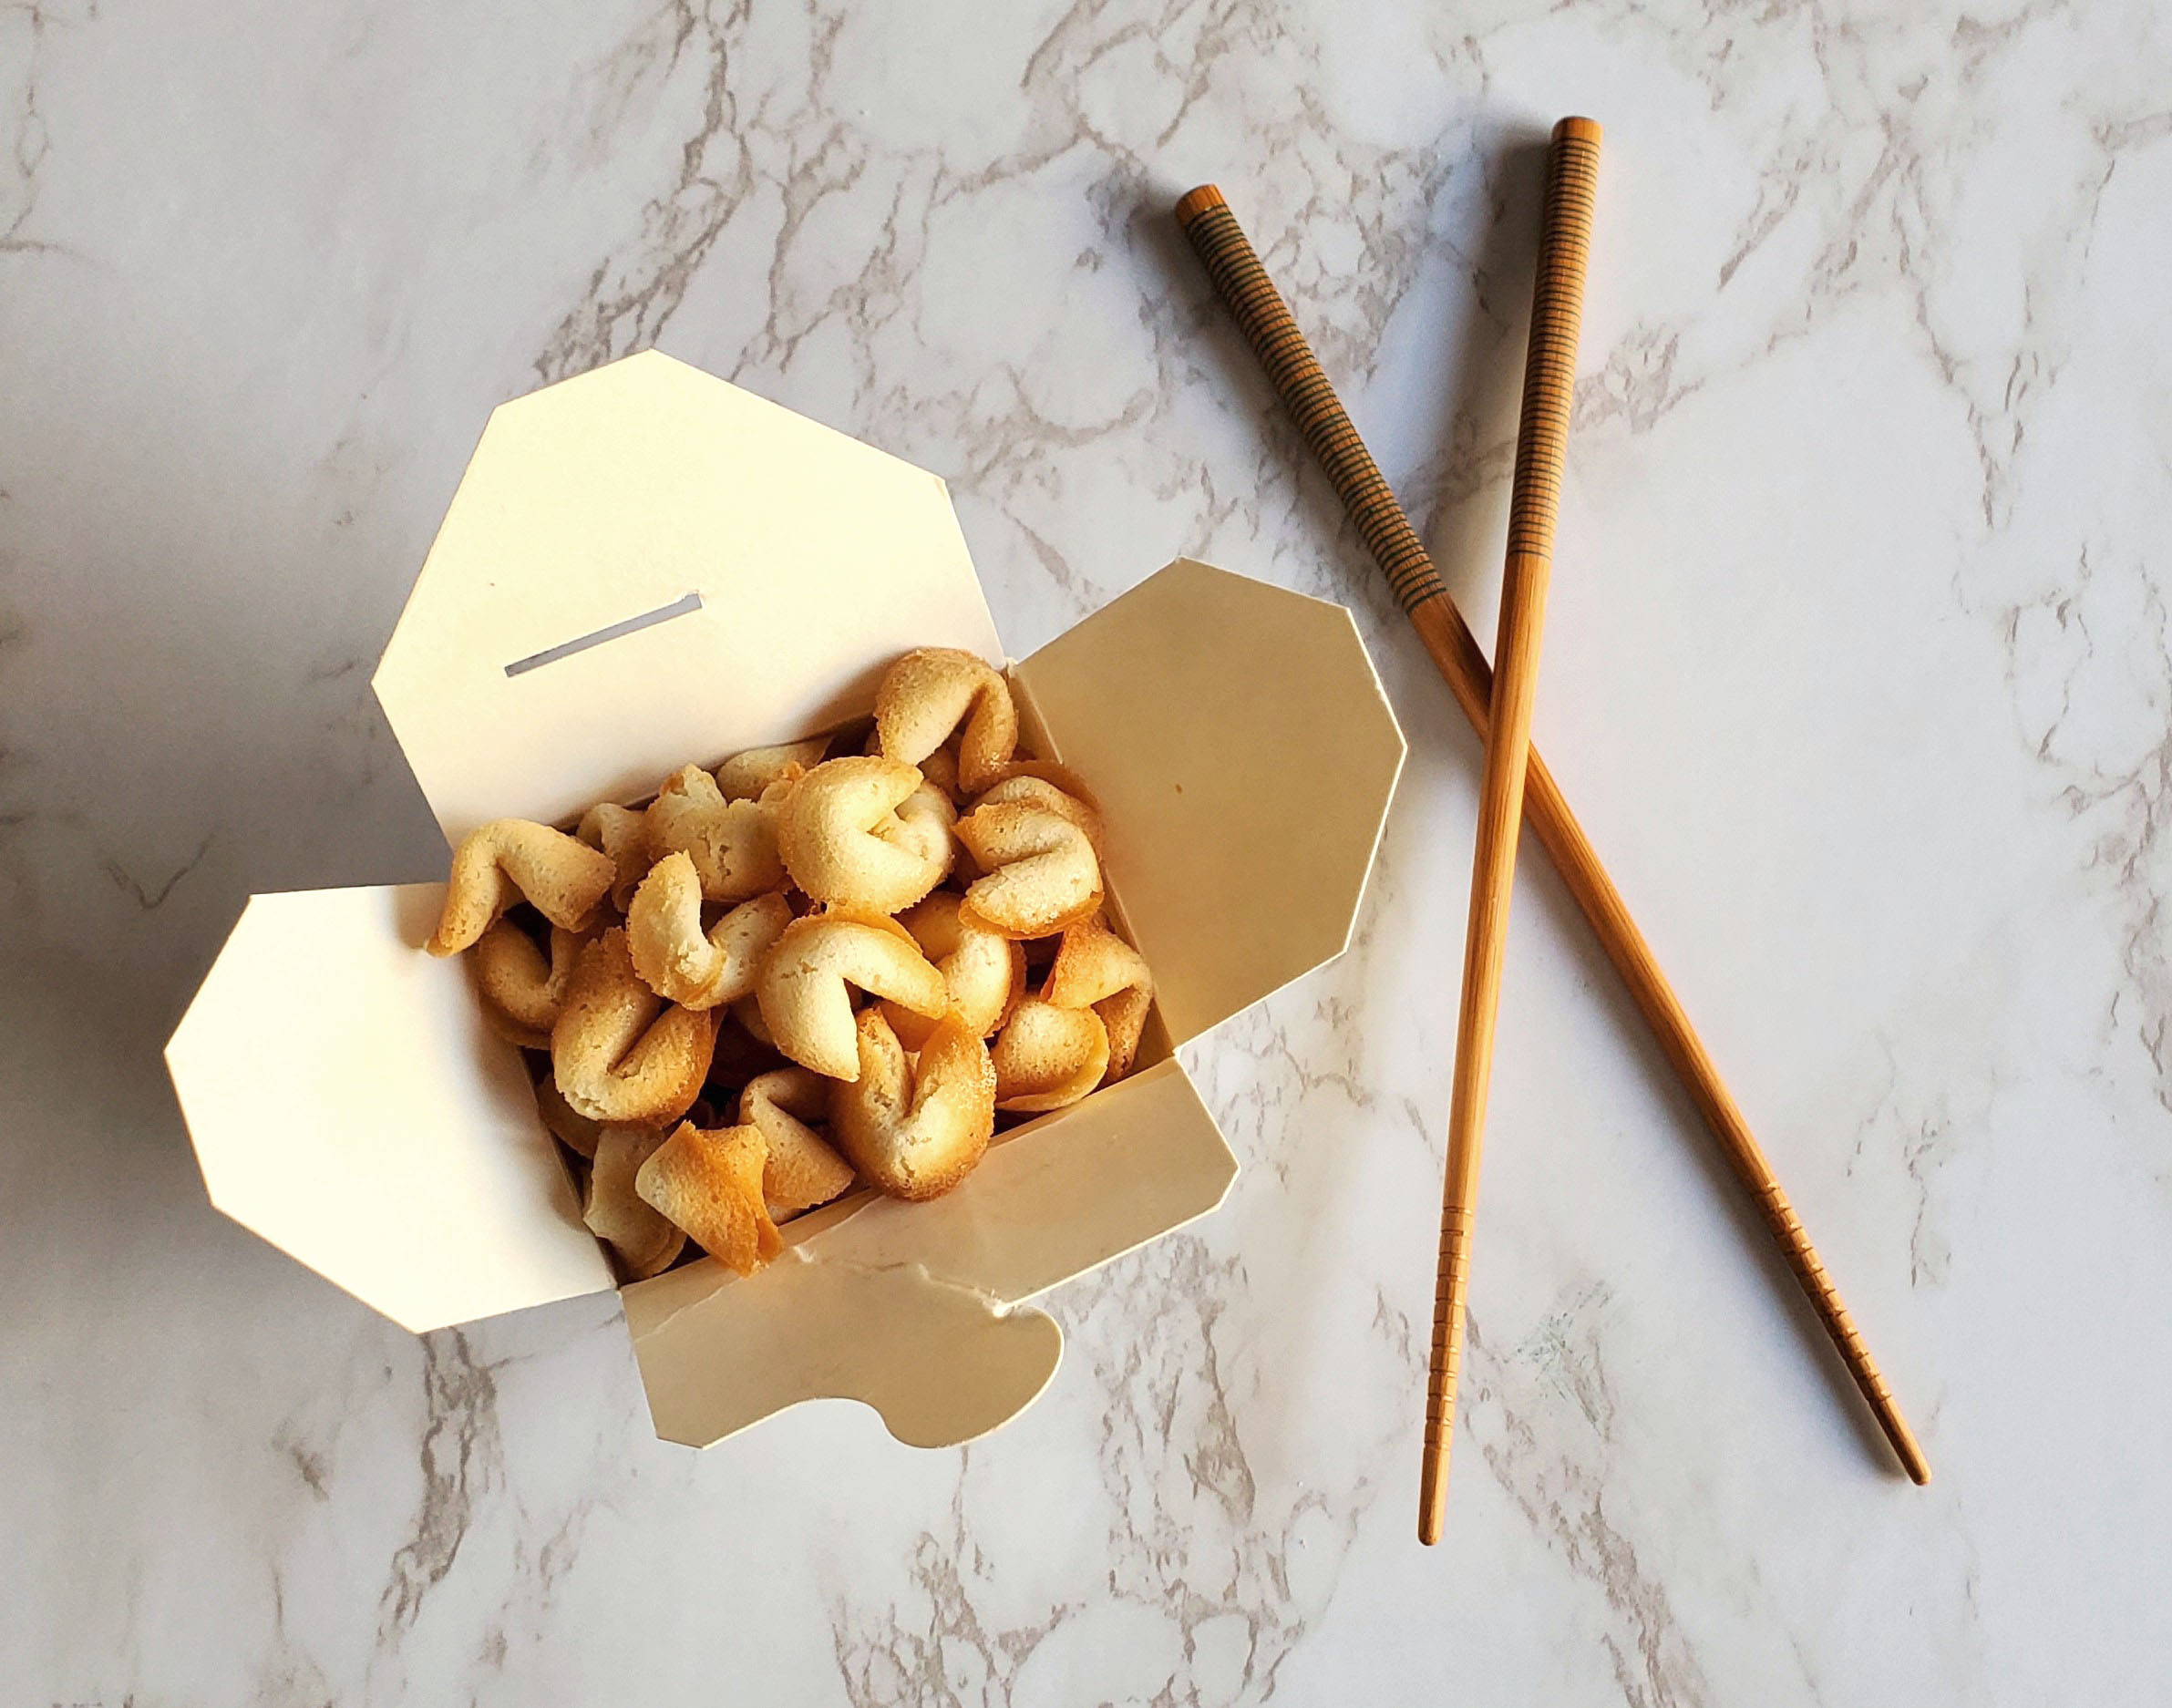 There is a small white Chinese takeout box filled with Fortune Cookie Cereal, overflowing out of it. To the right there is a pair of chopsticks with a green lined pattern at the top. The chopsticks are criss-crossed on top of the white marble countertop.